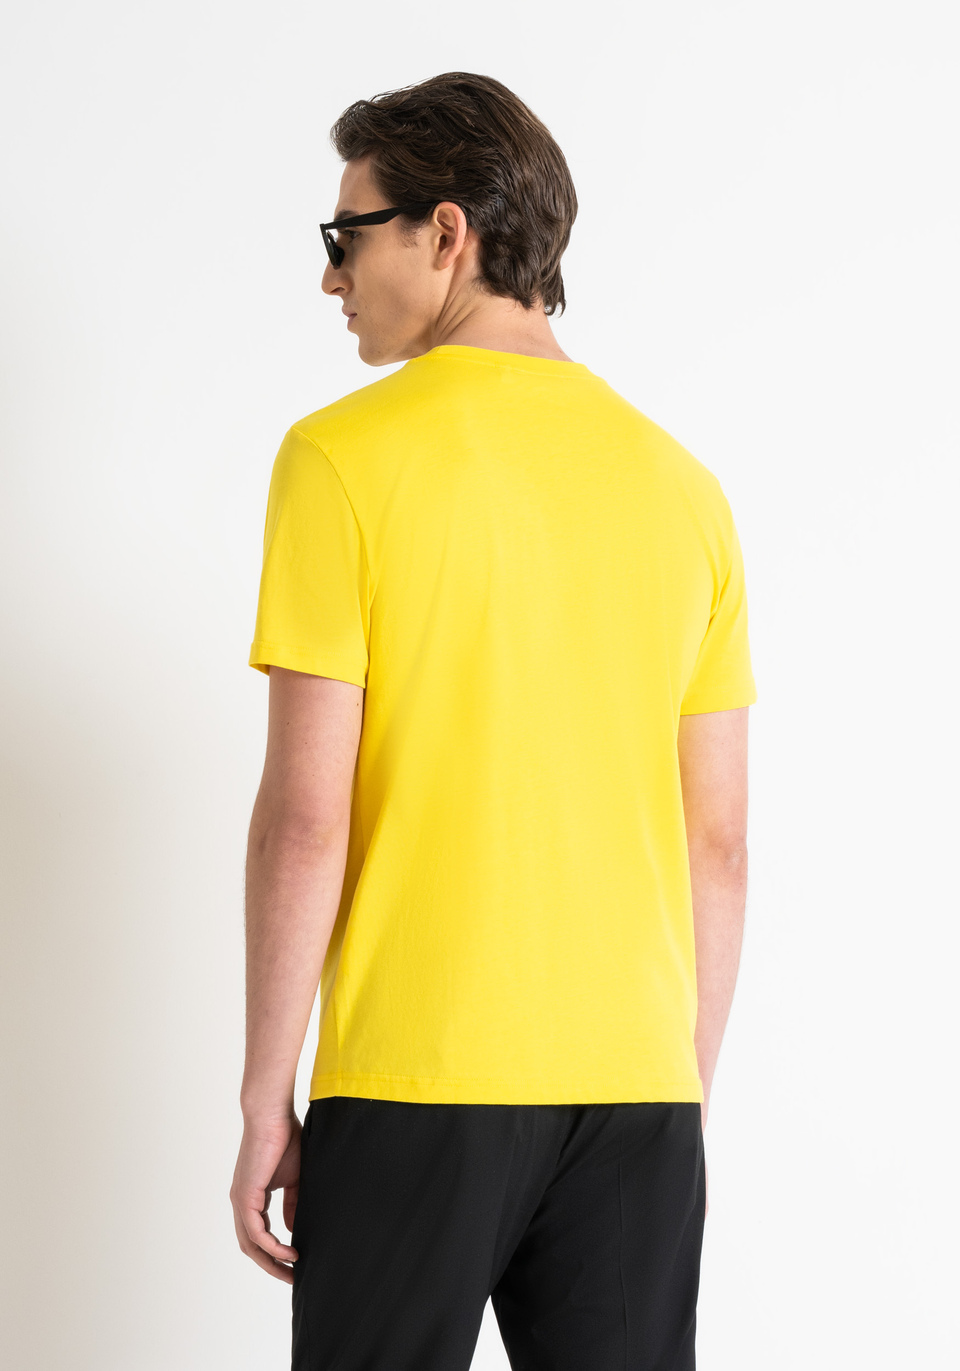 SLIM FIT T-SHIRT IN COTTON JERSEY WITH MATT PLASTIC LOGO PRINT AND RUBBERIZED INJECTION - Antony Morato Online Shop